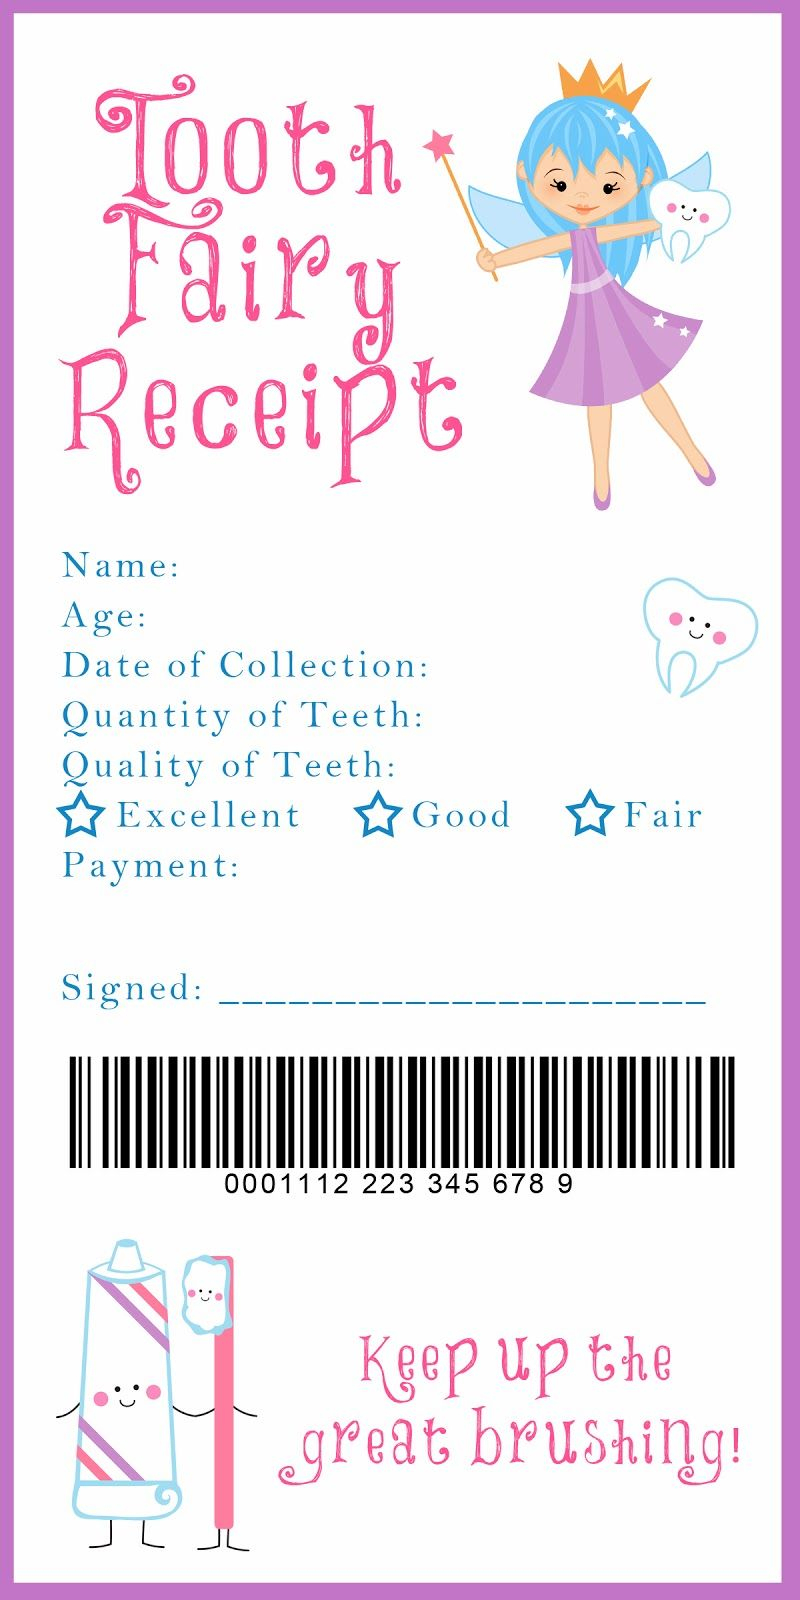 Tooth Fairy Receipt And Many Other Awesome Printables | Xixi &amp;lt;3 - Free Printable Tooth Fairy Letter And Envelope